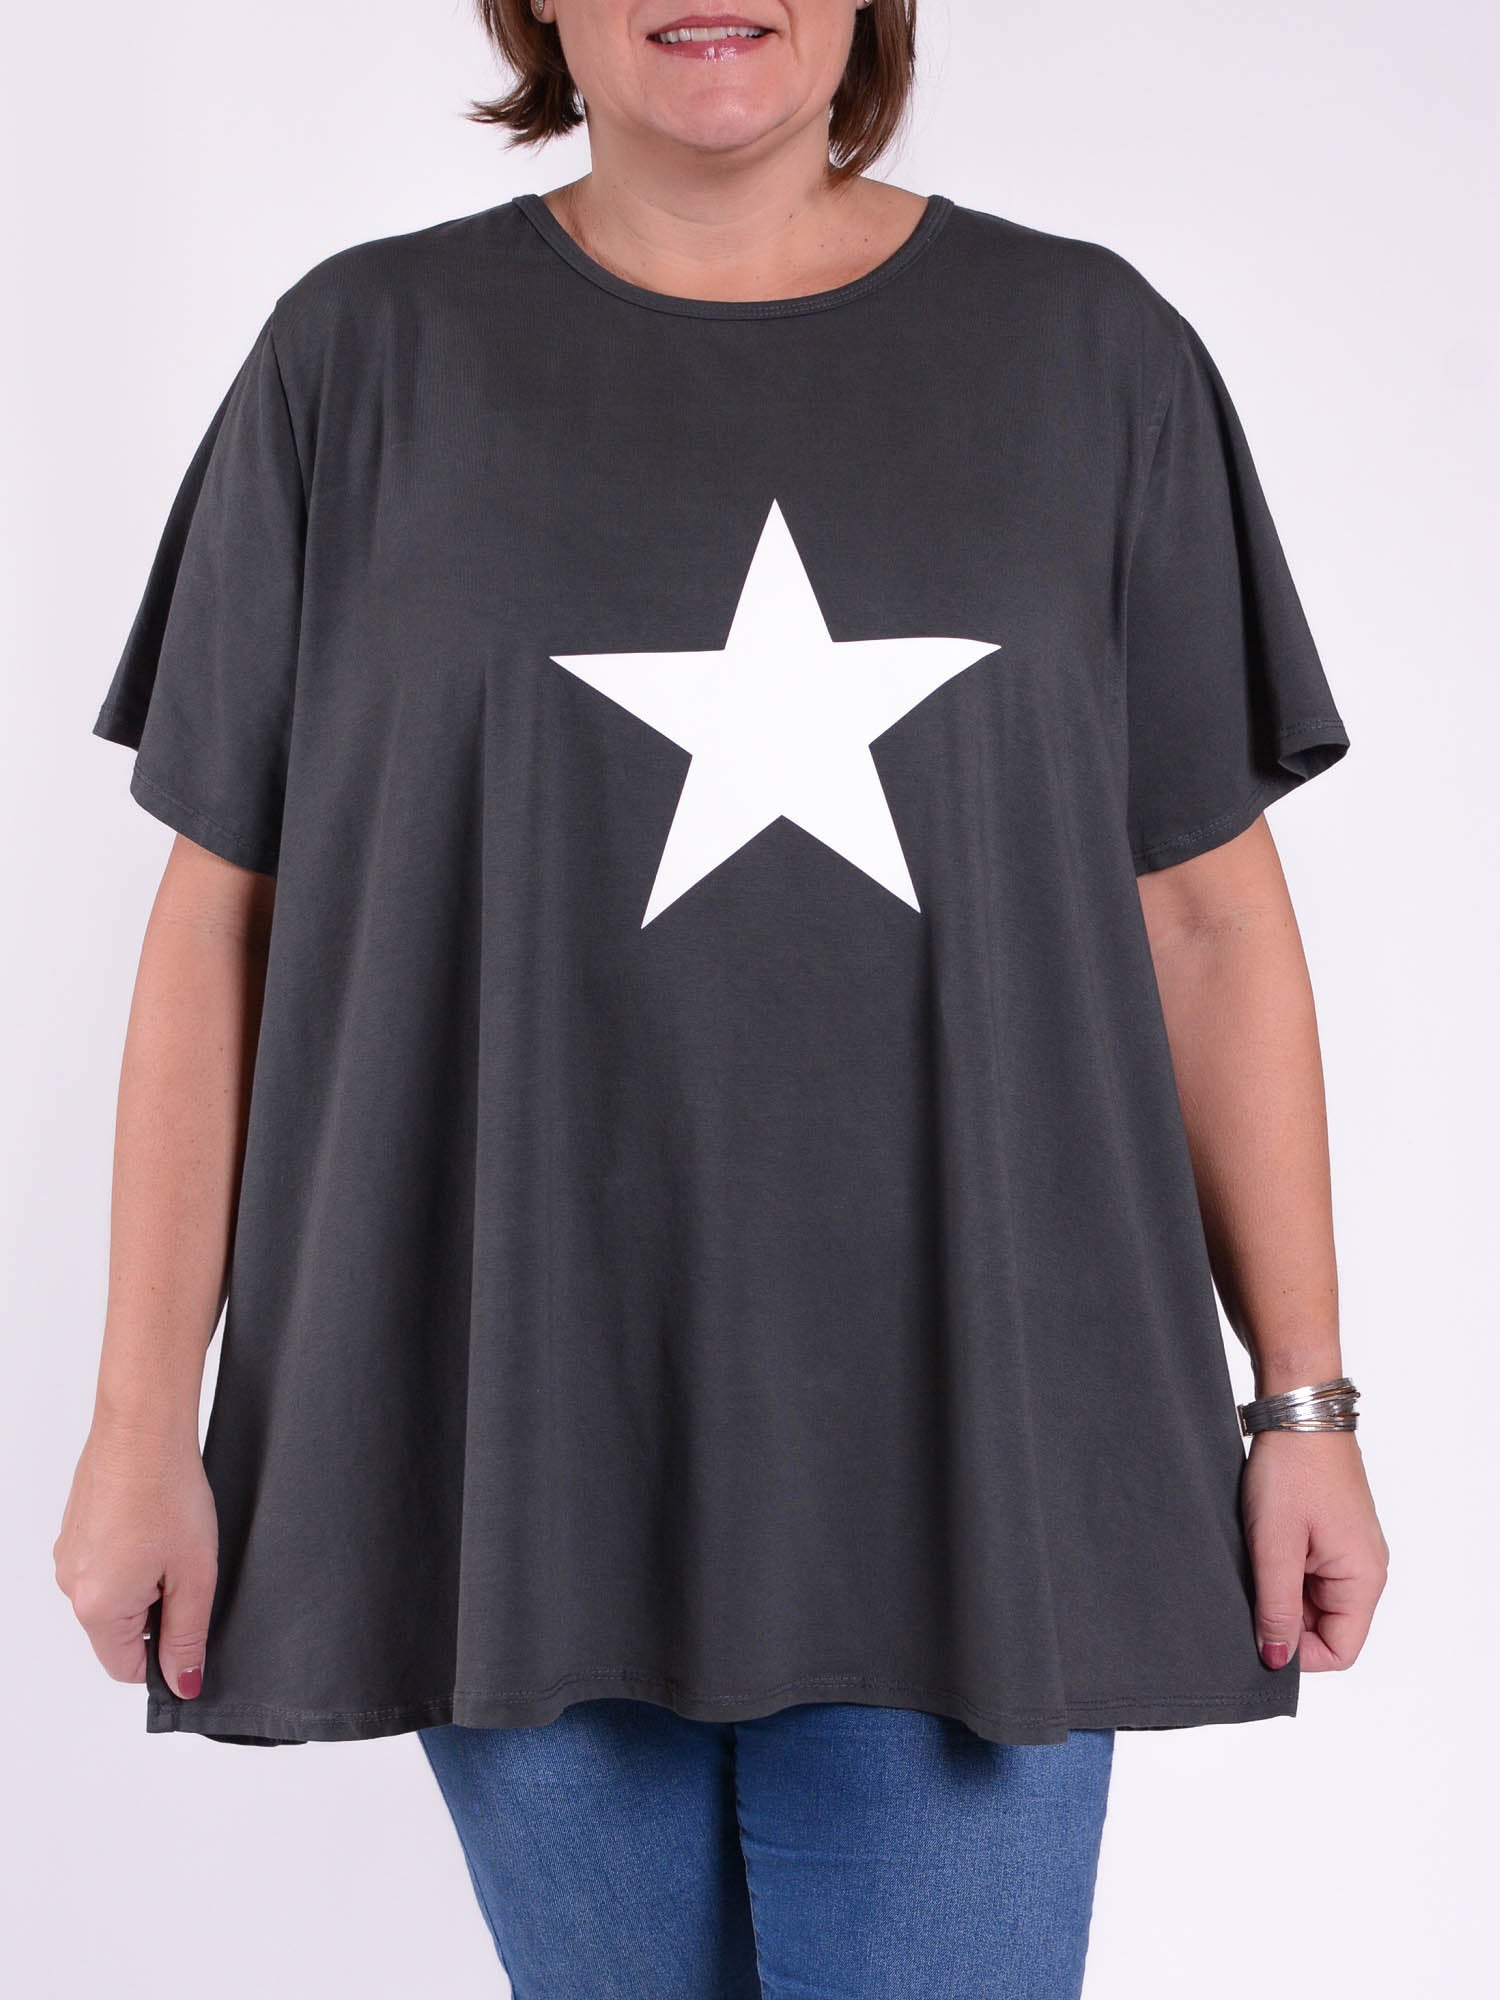 Cotton Short Sleeve Swing T Shirt - 10516 STAR, Tops & Shirts, Pure Plus Clothing, Lagenlook Clothing, Plus Size Fashion, Over 50 Fashion